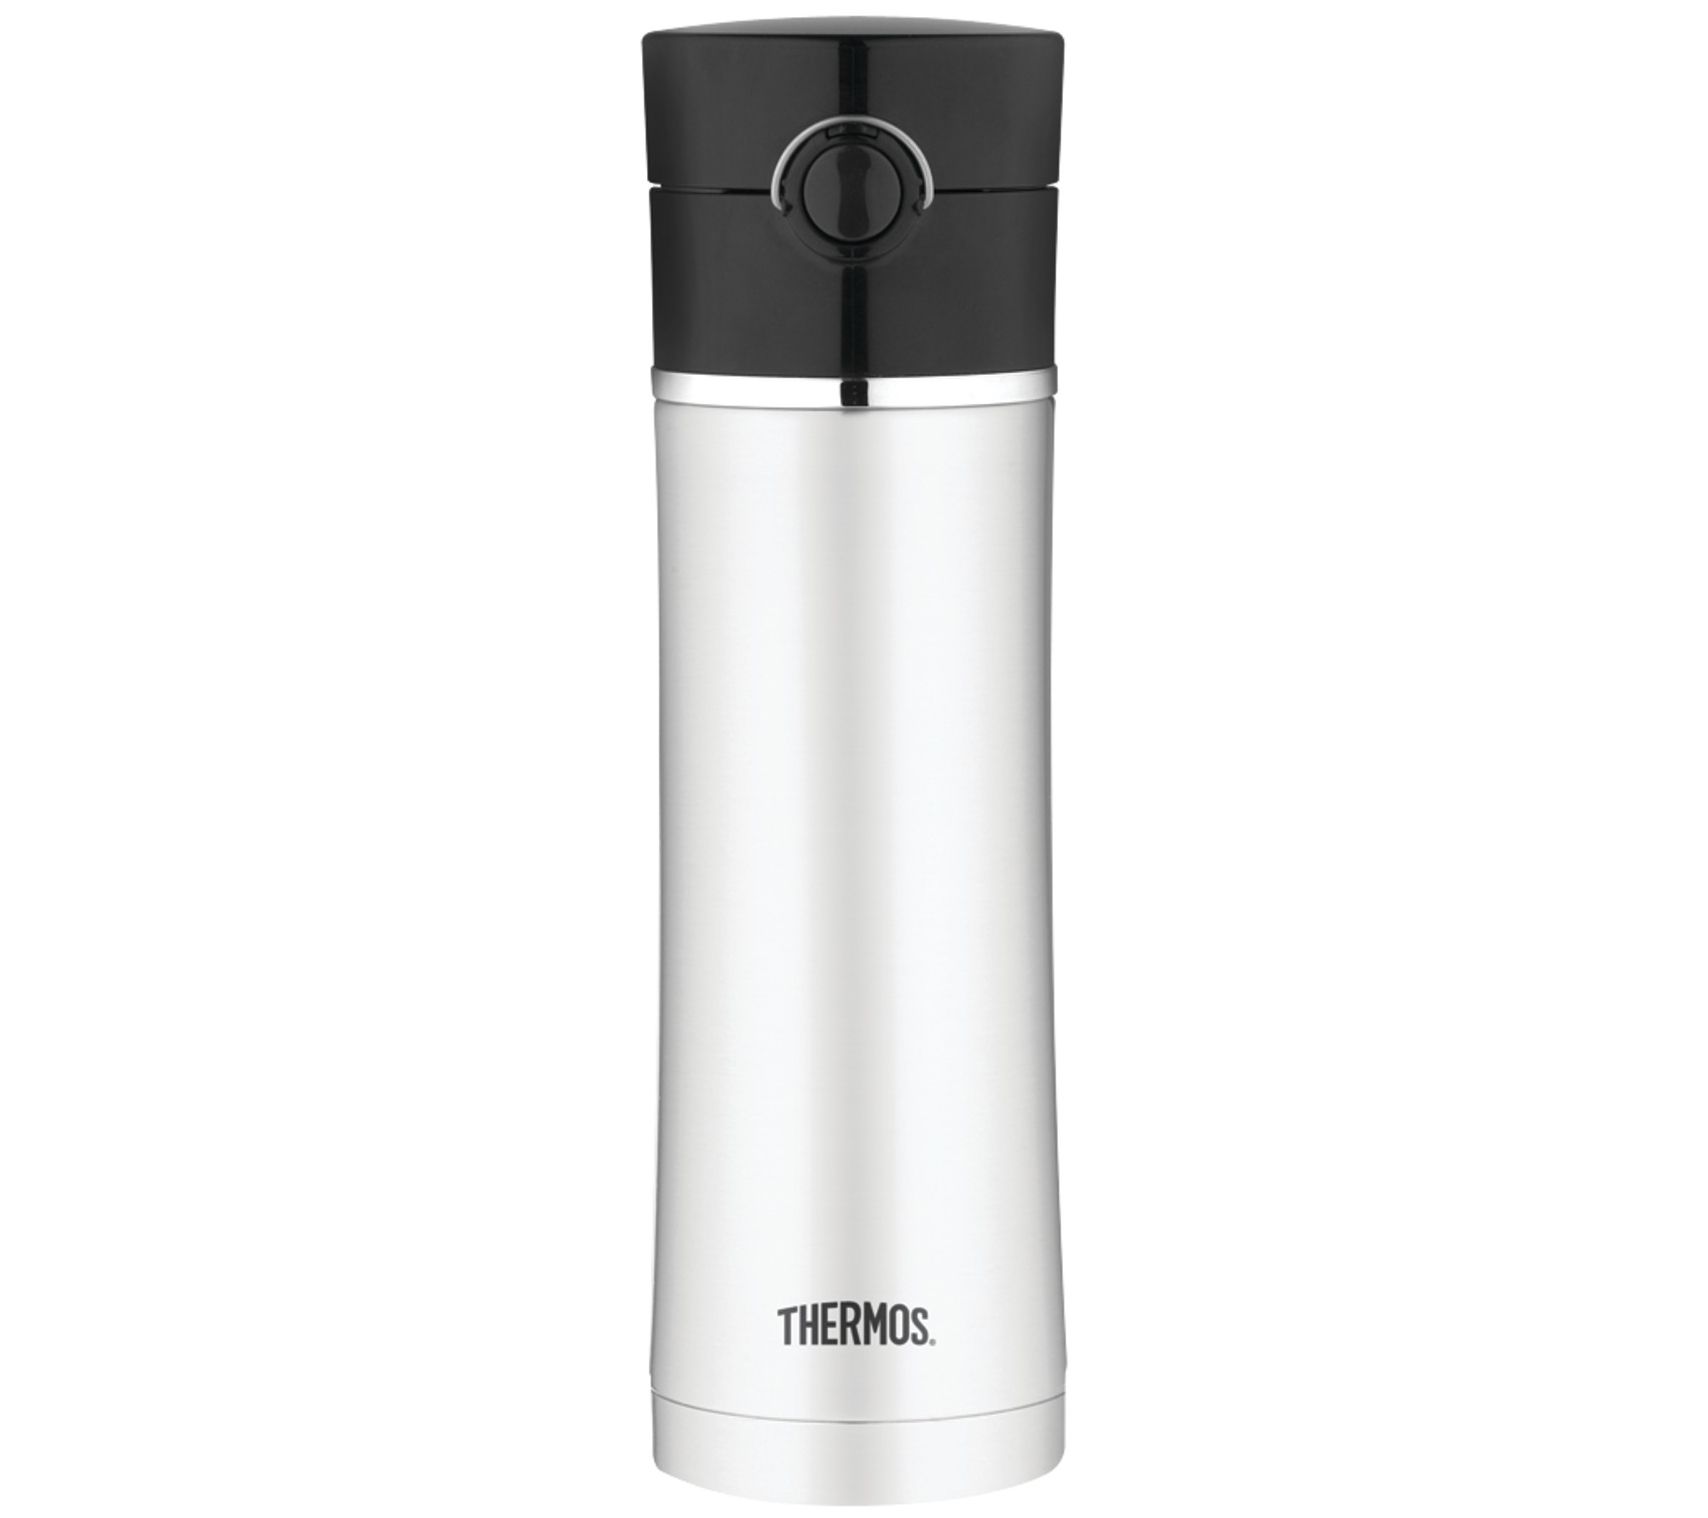 Thermos 16 oz. Vacuum Insulated Stainless Steel Direct Drink Bottle